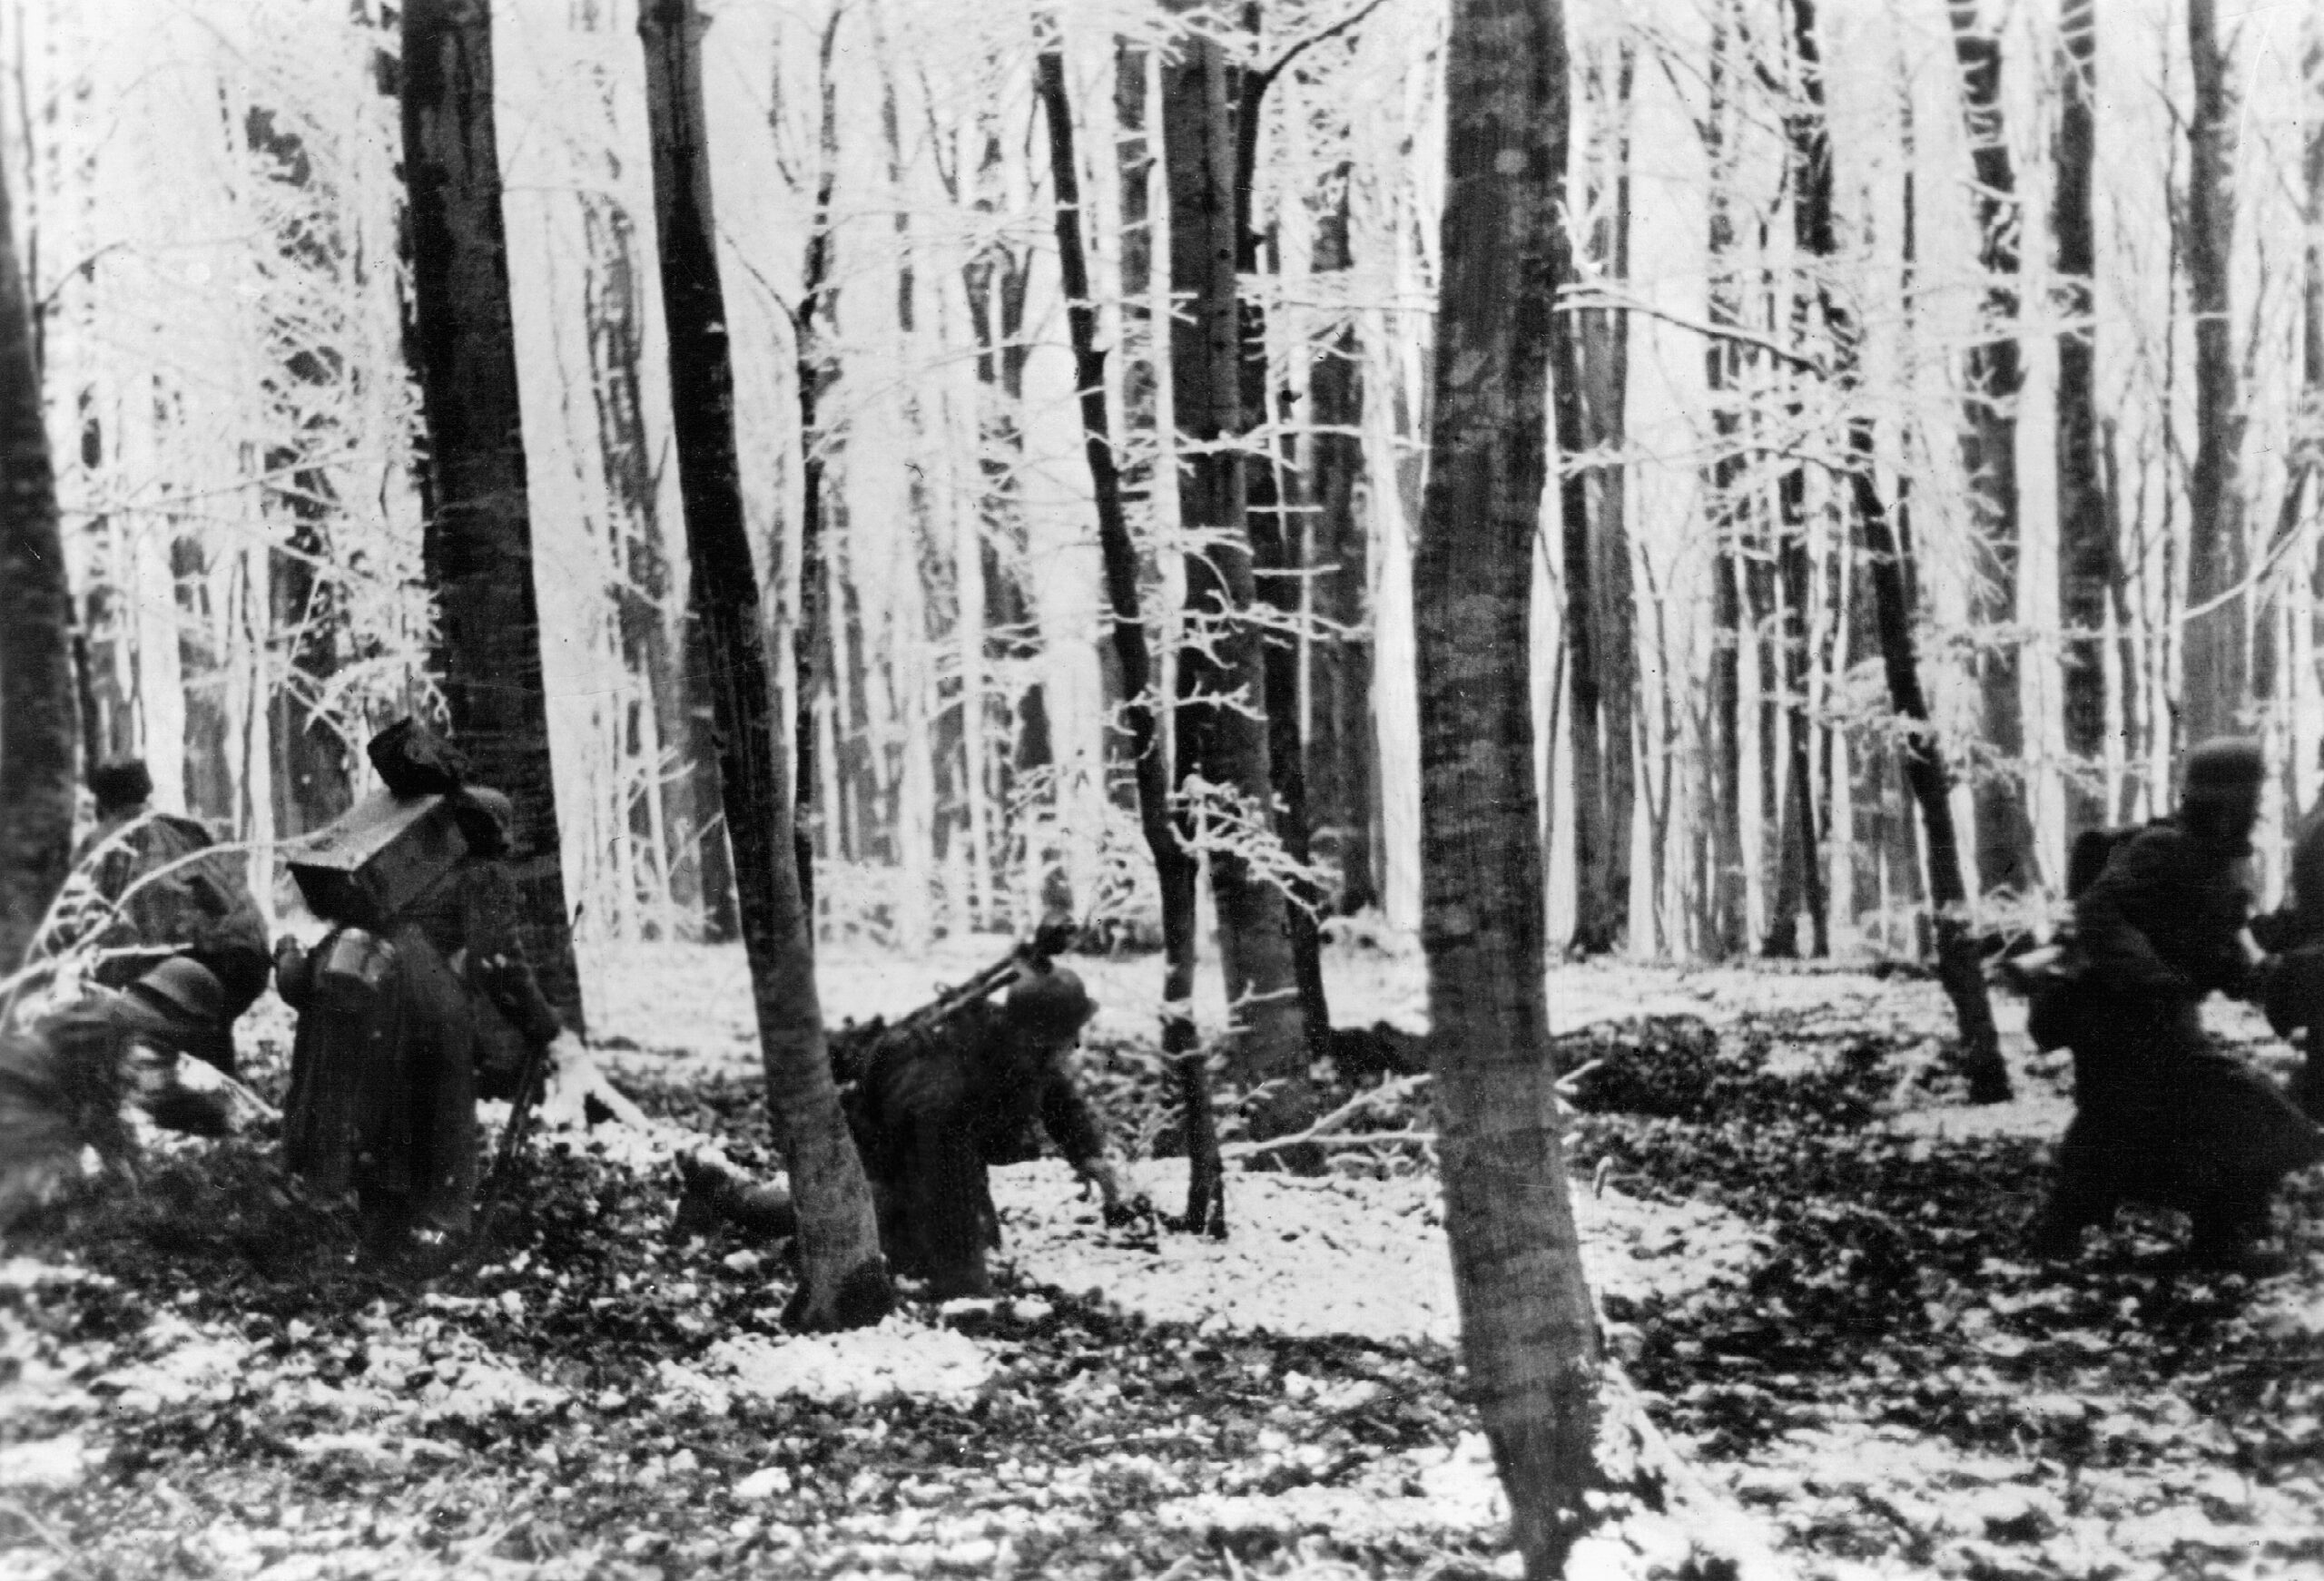 On January 15, 1945, German infantrymen pick their way through a wooded area during the costly Ardennes offensive. Hitler’s bid to capture the port of Antwerp and split the Allied armies in the West ended in failure.